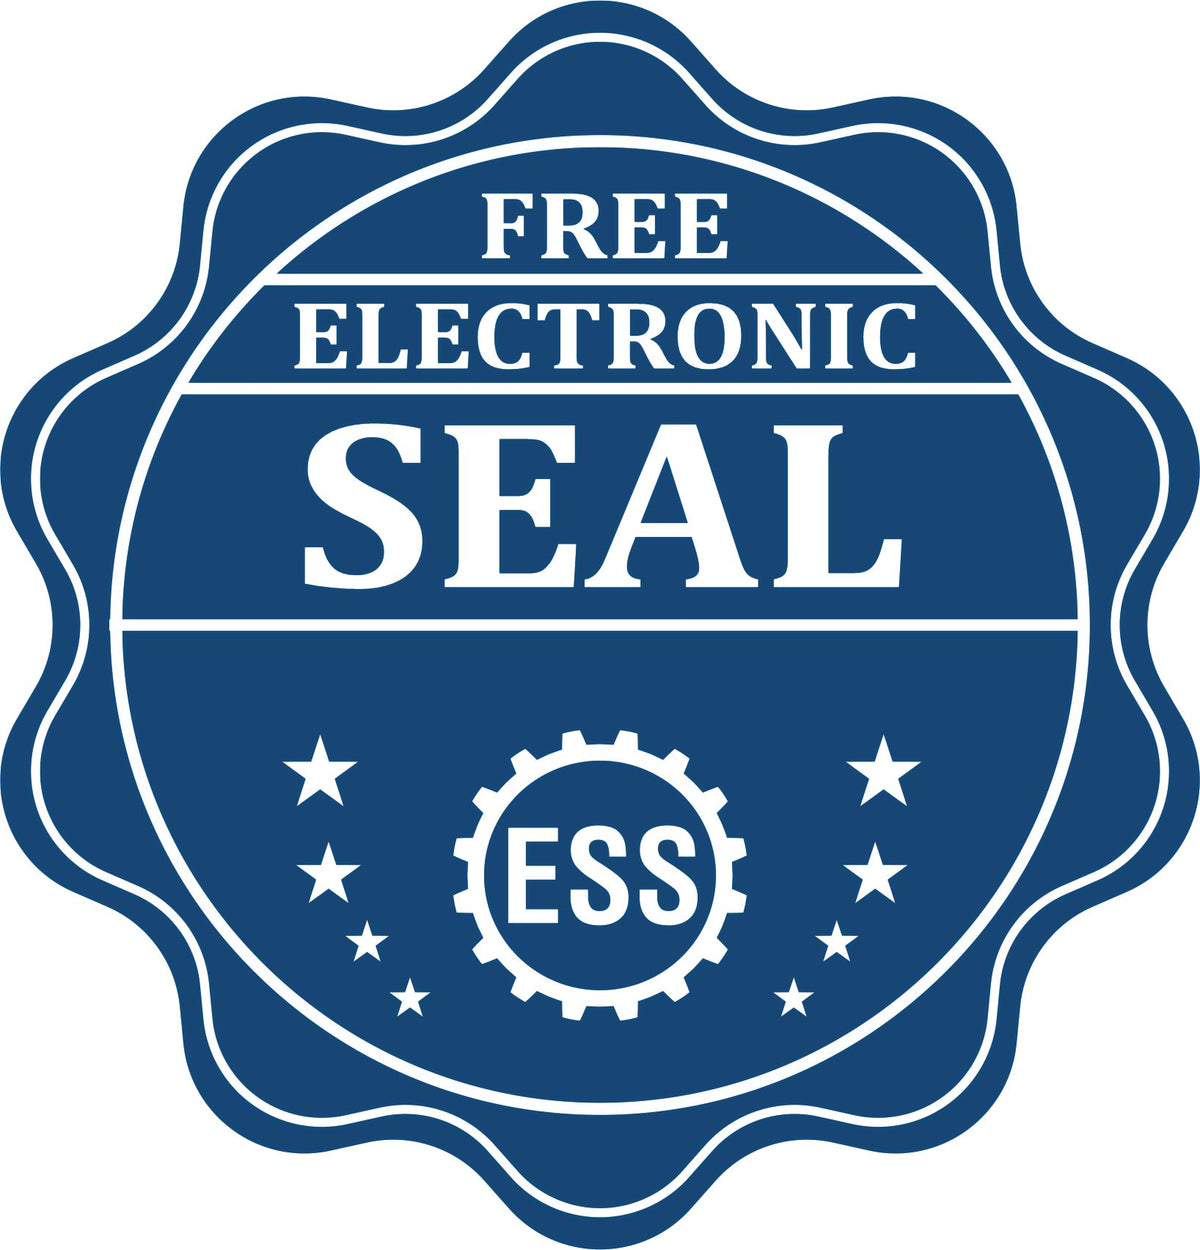 A badge showing a free electronic seal for the Tennessee Desk Architect Embossing Seal with stars and the ESS gear on the emblem.